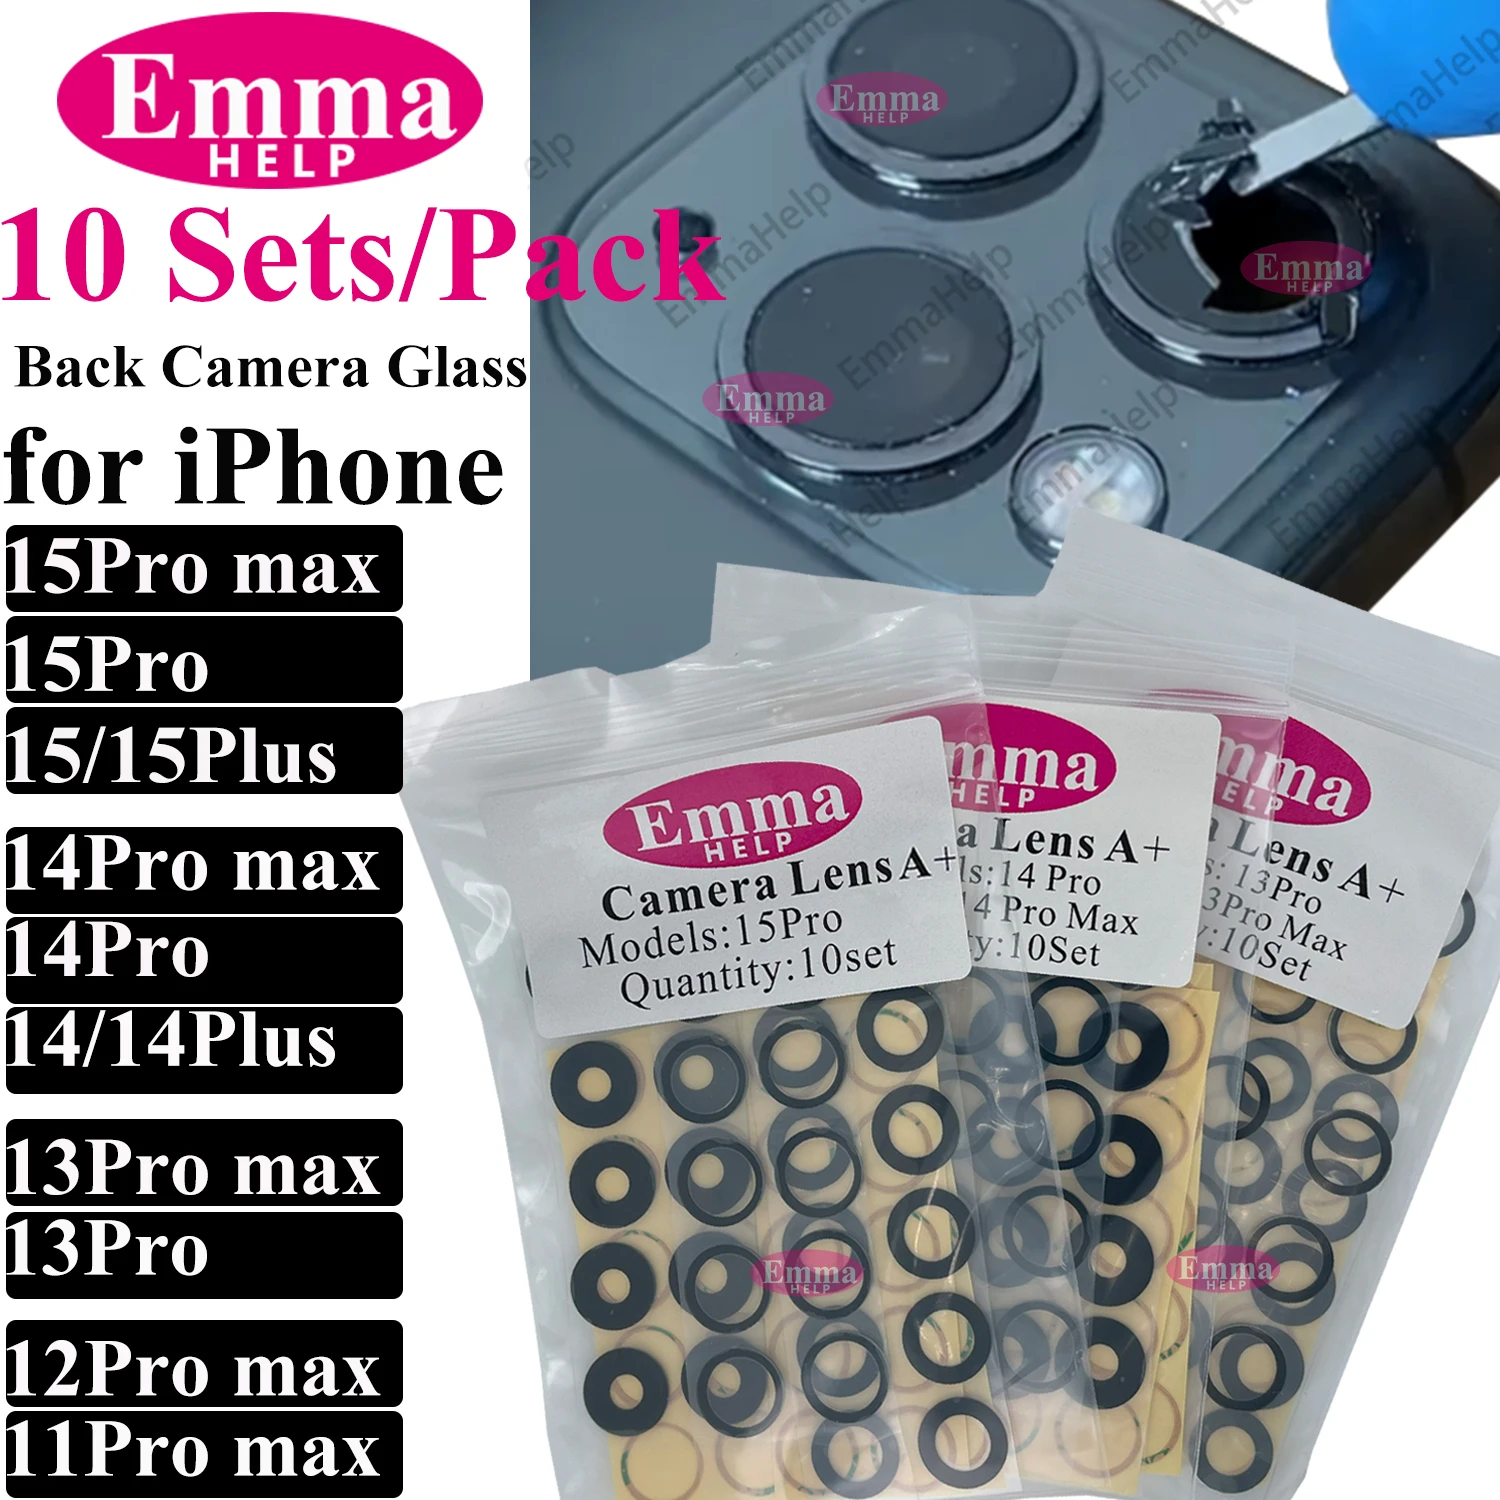 EmmaHelp 10set/pack Back Camera Glass for iPhone 11 13 15 Pro Max 13MINI  XS 14plus 12Pro Rear Cam Cover Lens + Sticker Adhesive